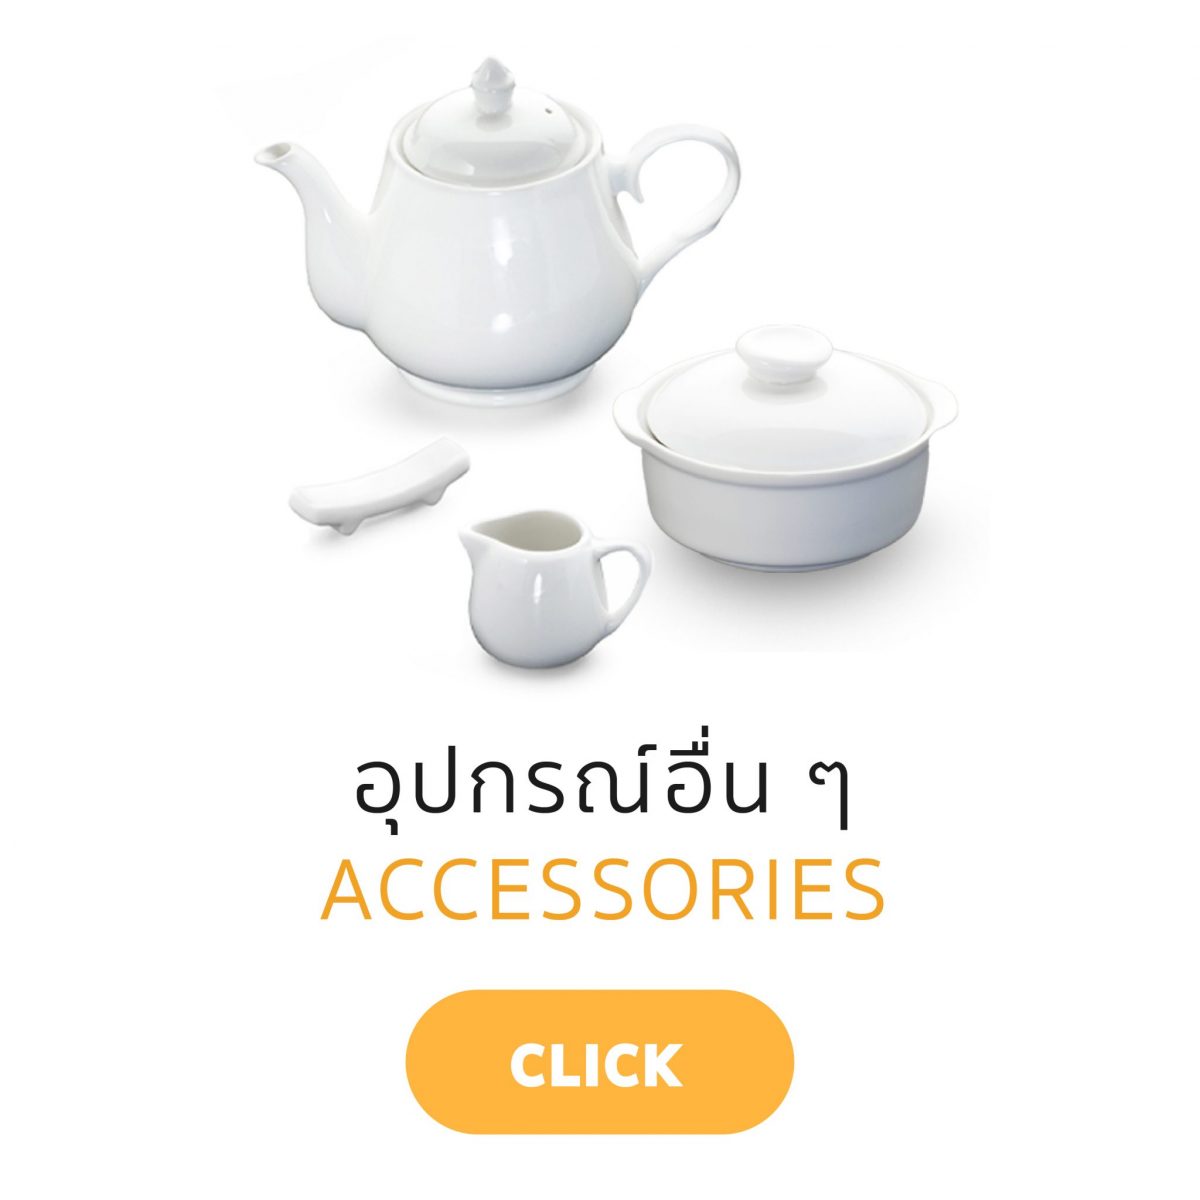 White Porcelain Accessories-Click Here